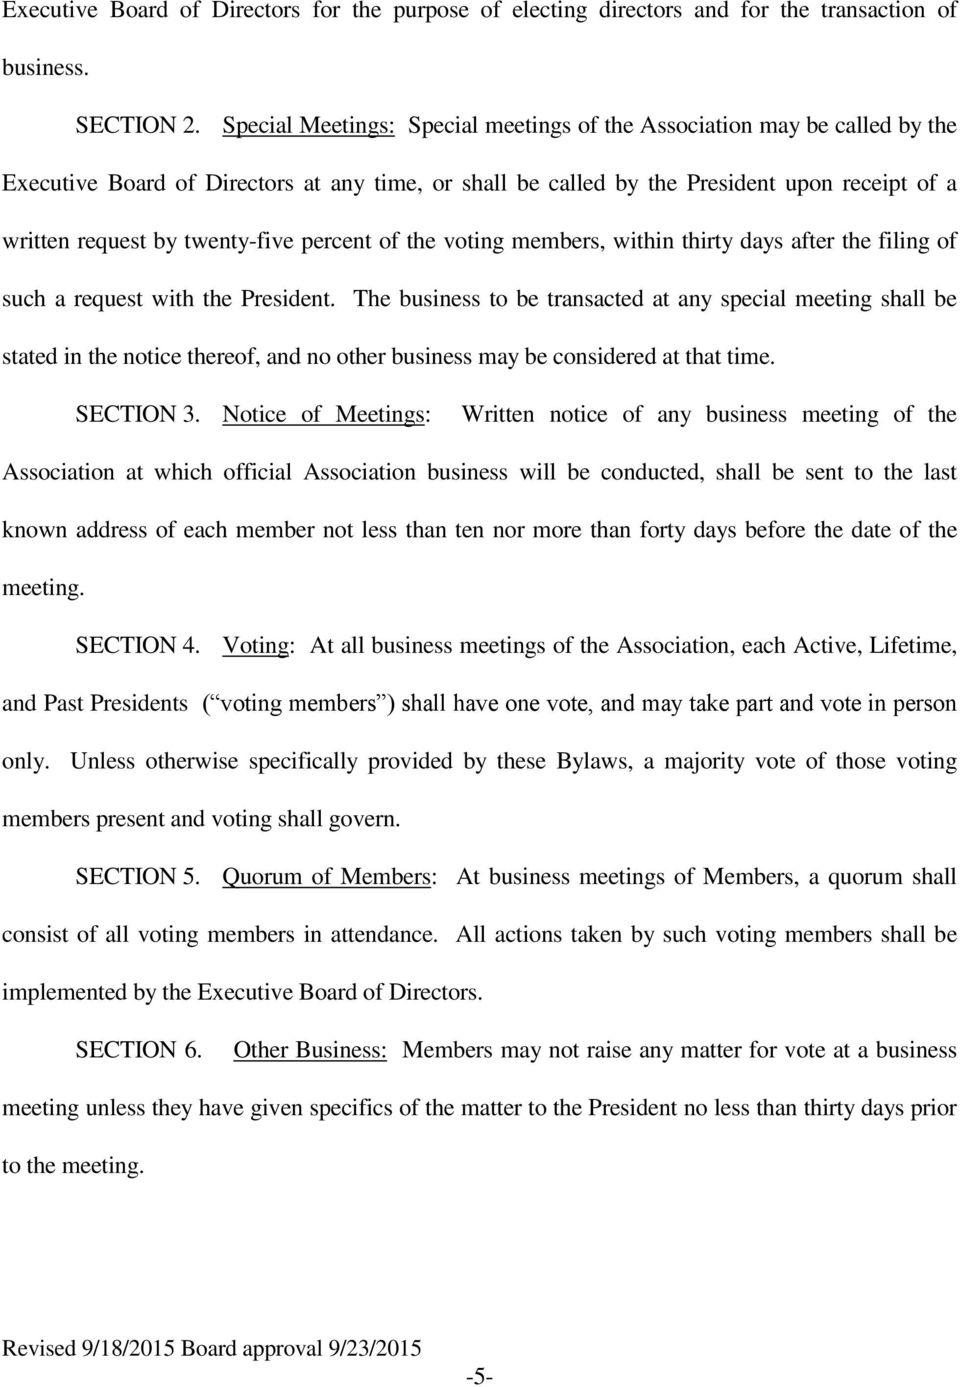 twenty-five percent of the voting members, within thirty days after the filing of such a request with the President.